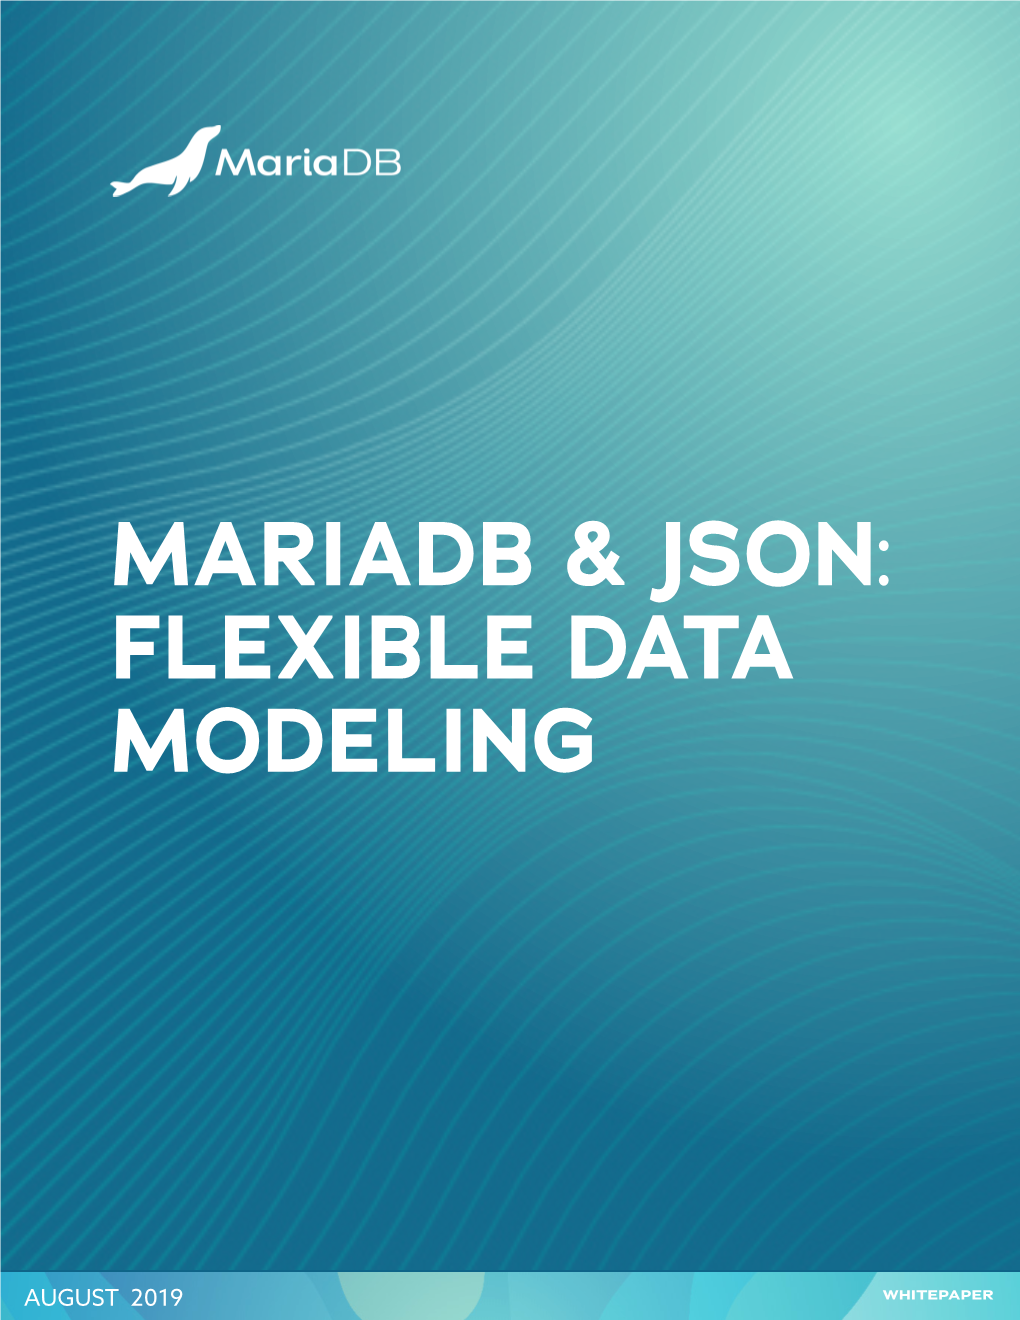 Mariadb and JSON: Flexible Data Modeling